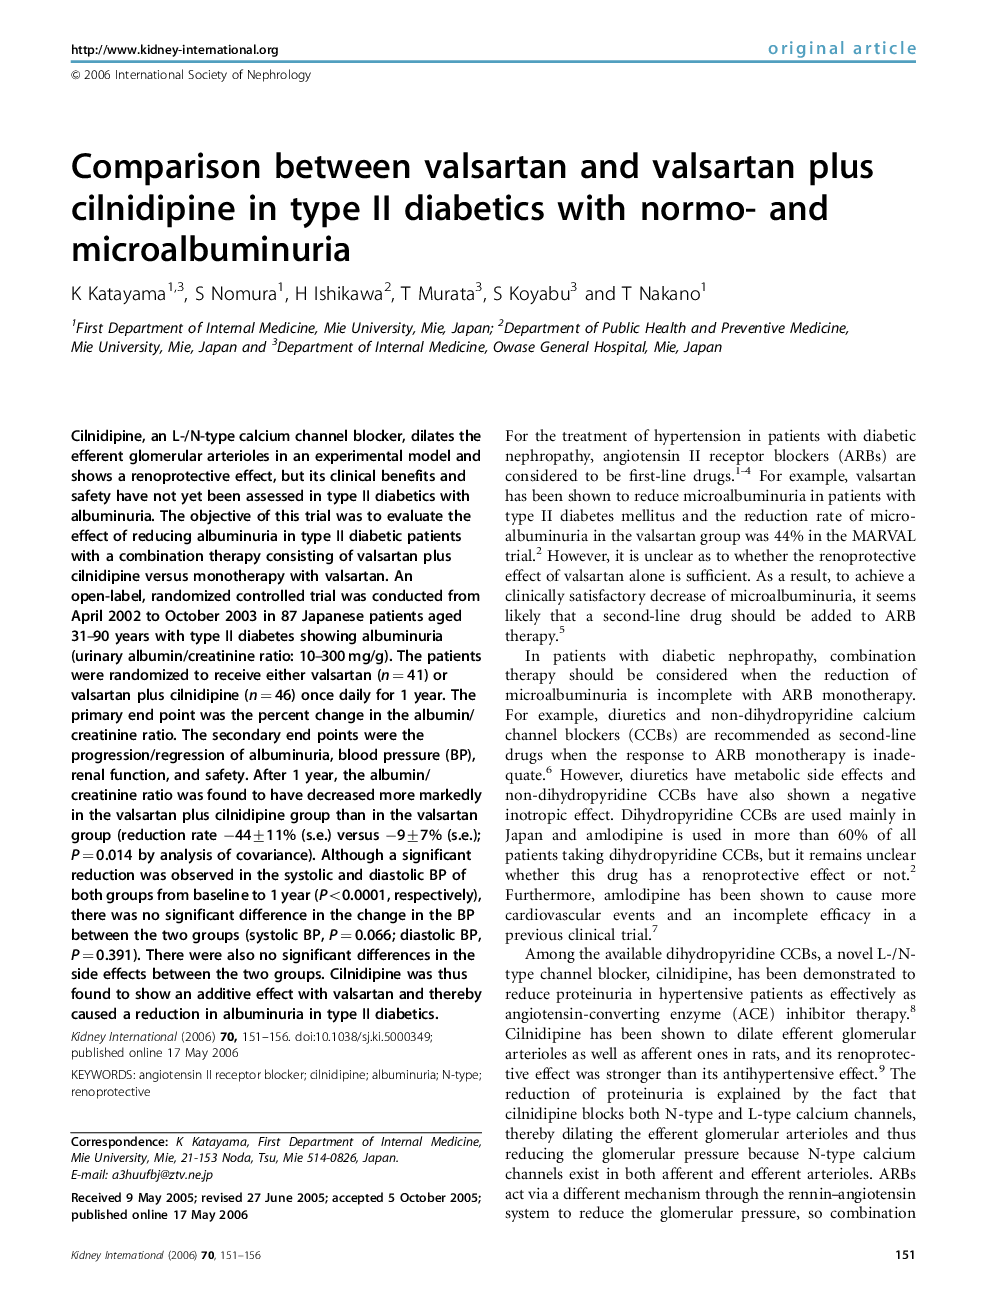 Comparison between valsartan and valsartan plus cilnidipine in type II diabetics with normo- and microalbuminuria